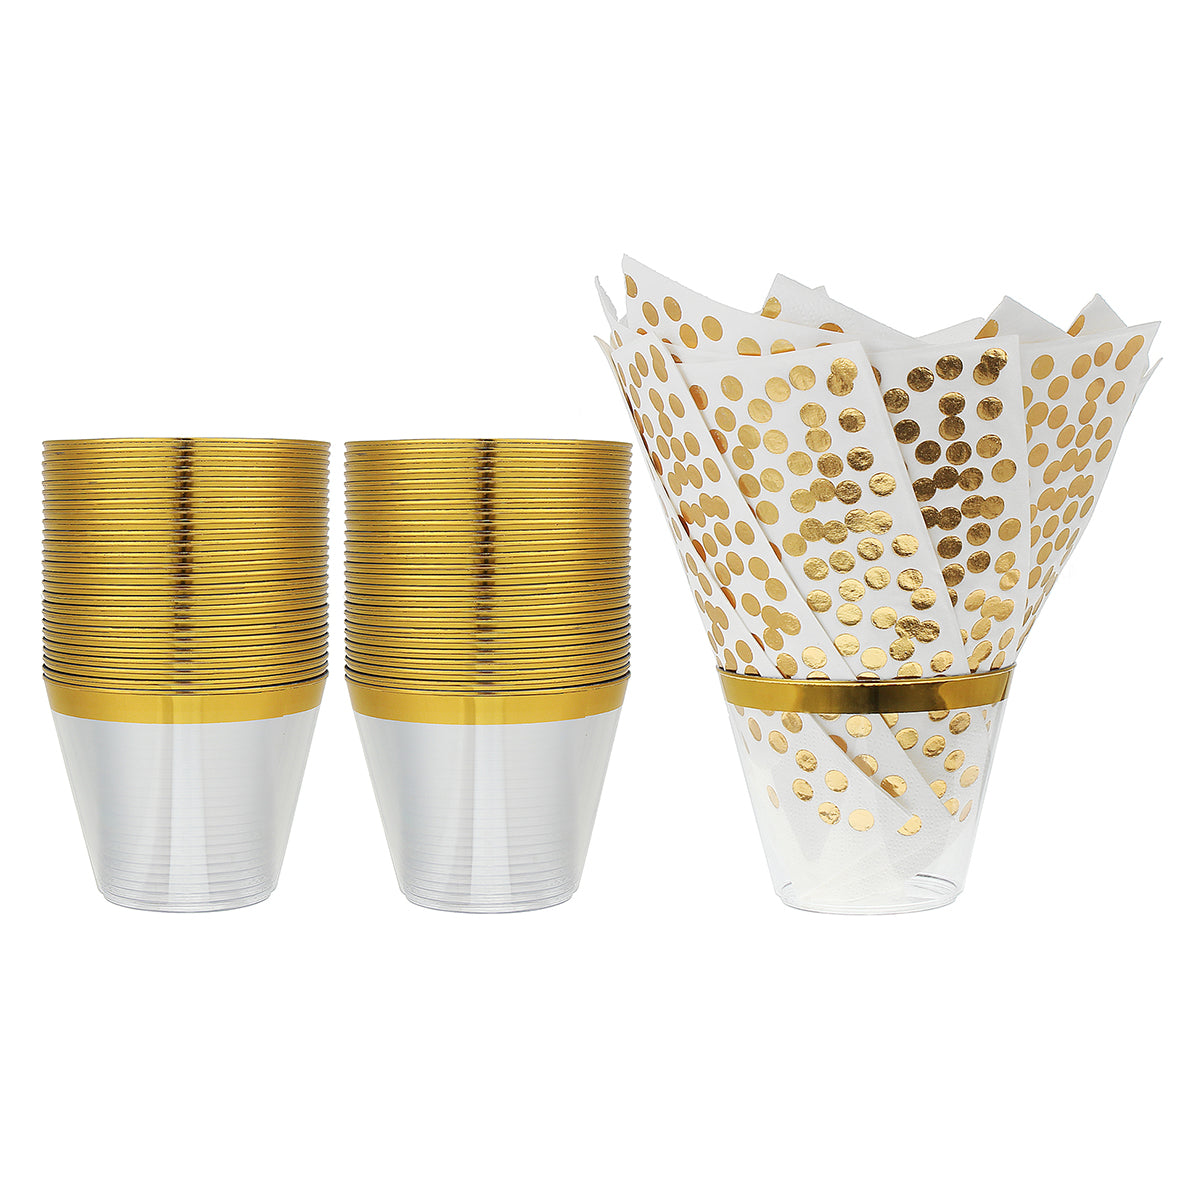 50PCS Disposable Plastic Cups 9oz with 50PCS Disposable Napkins For Birthday Wedding Tableware Set